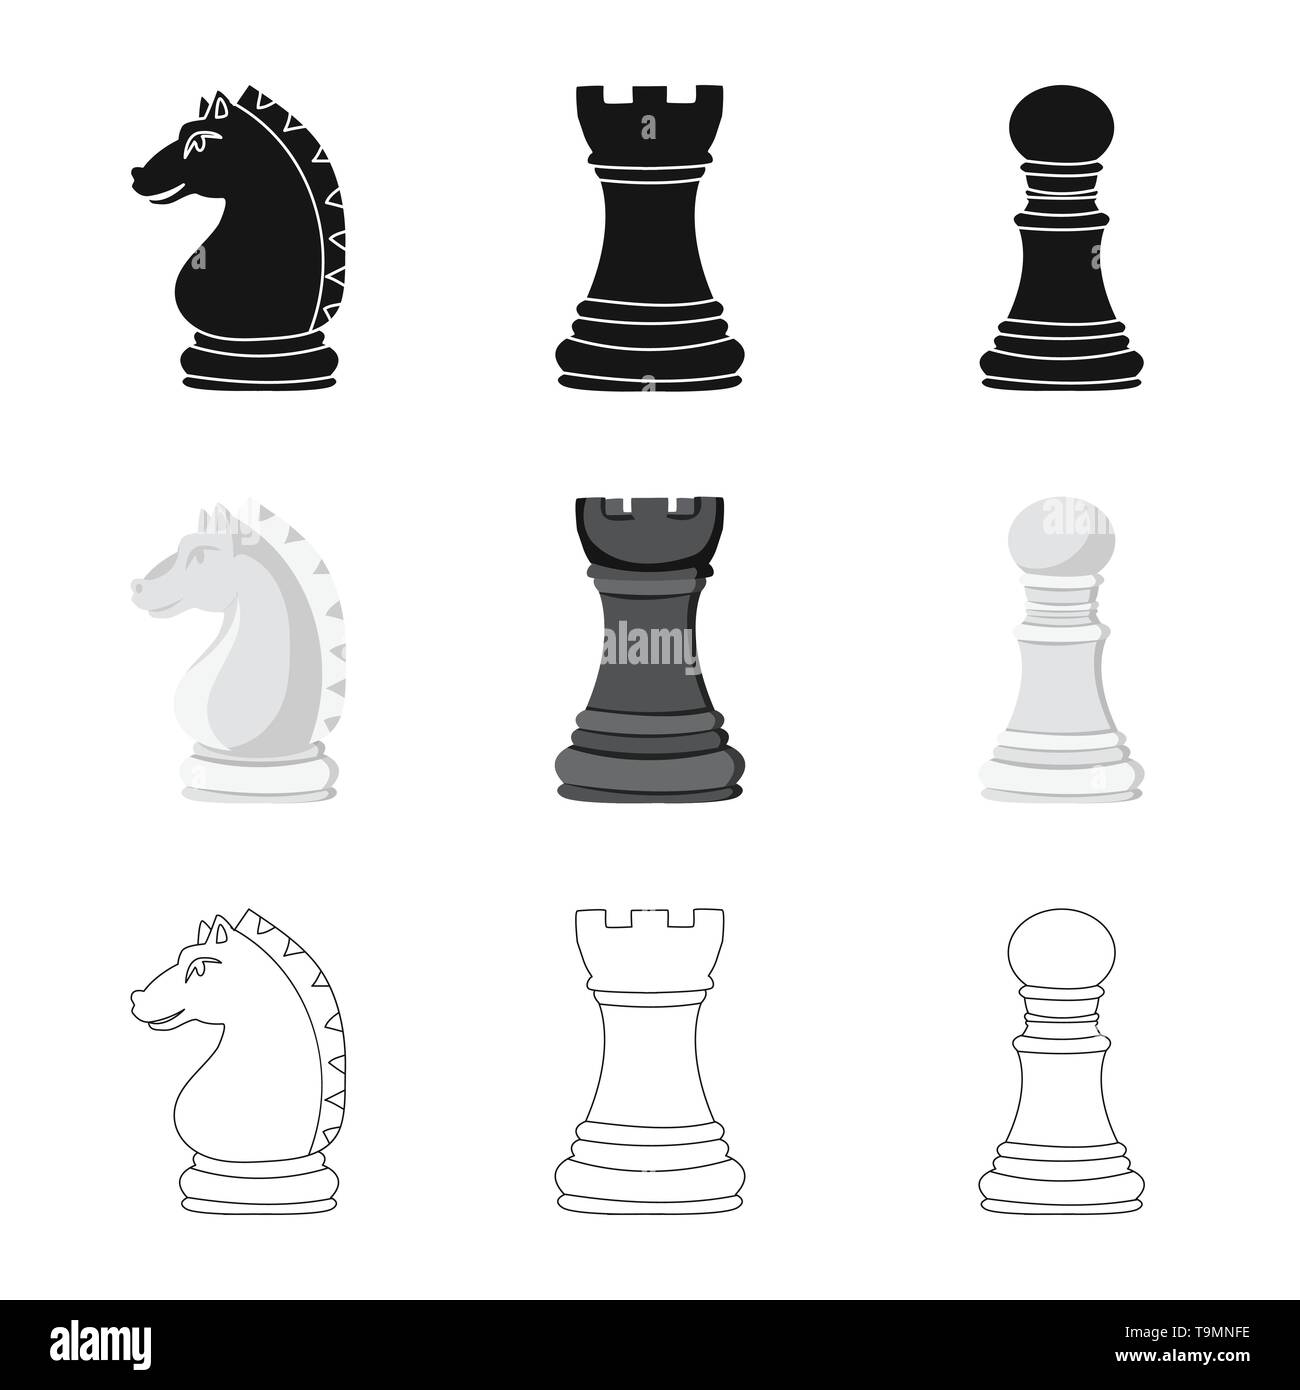 knight,rook,pawn,horse,black,board,castle,white,tower,figure,head,network,counter,change,tournament,goal,leadership,sculpture,action,achieve,statue,sport,fight,stallion,success,match,checkmate,thin,club,target,chess,game,piece,strategy,tactical,play,set,vector,icon,illustration,isolated,collection,design,element,graphic,sign Vector Vectors , Stock Vector